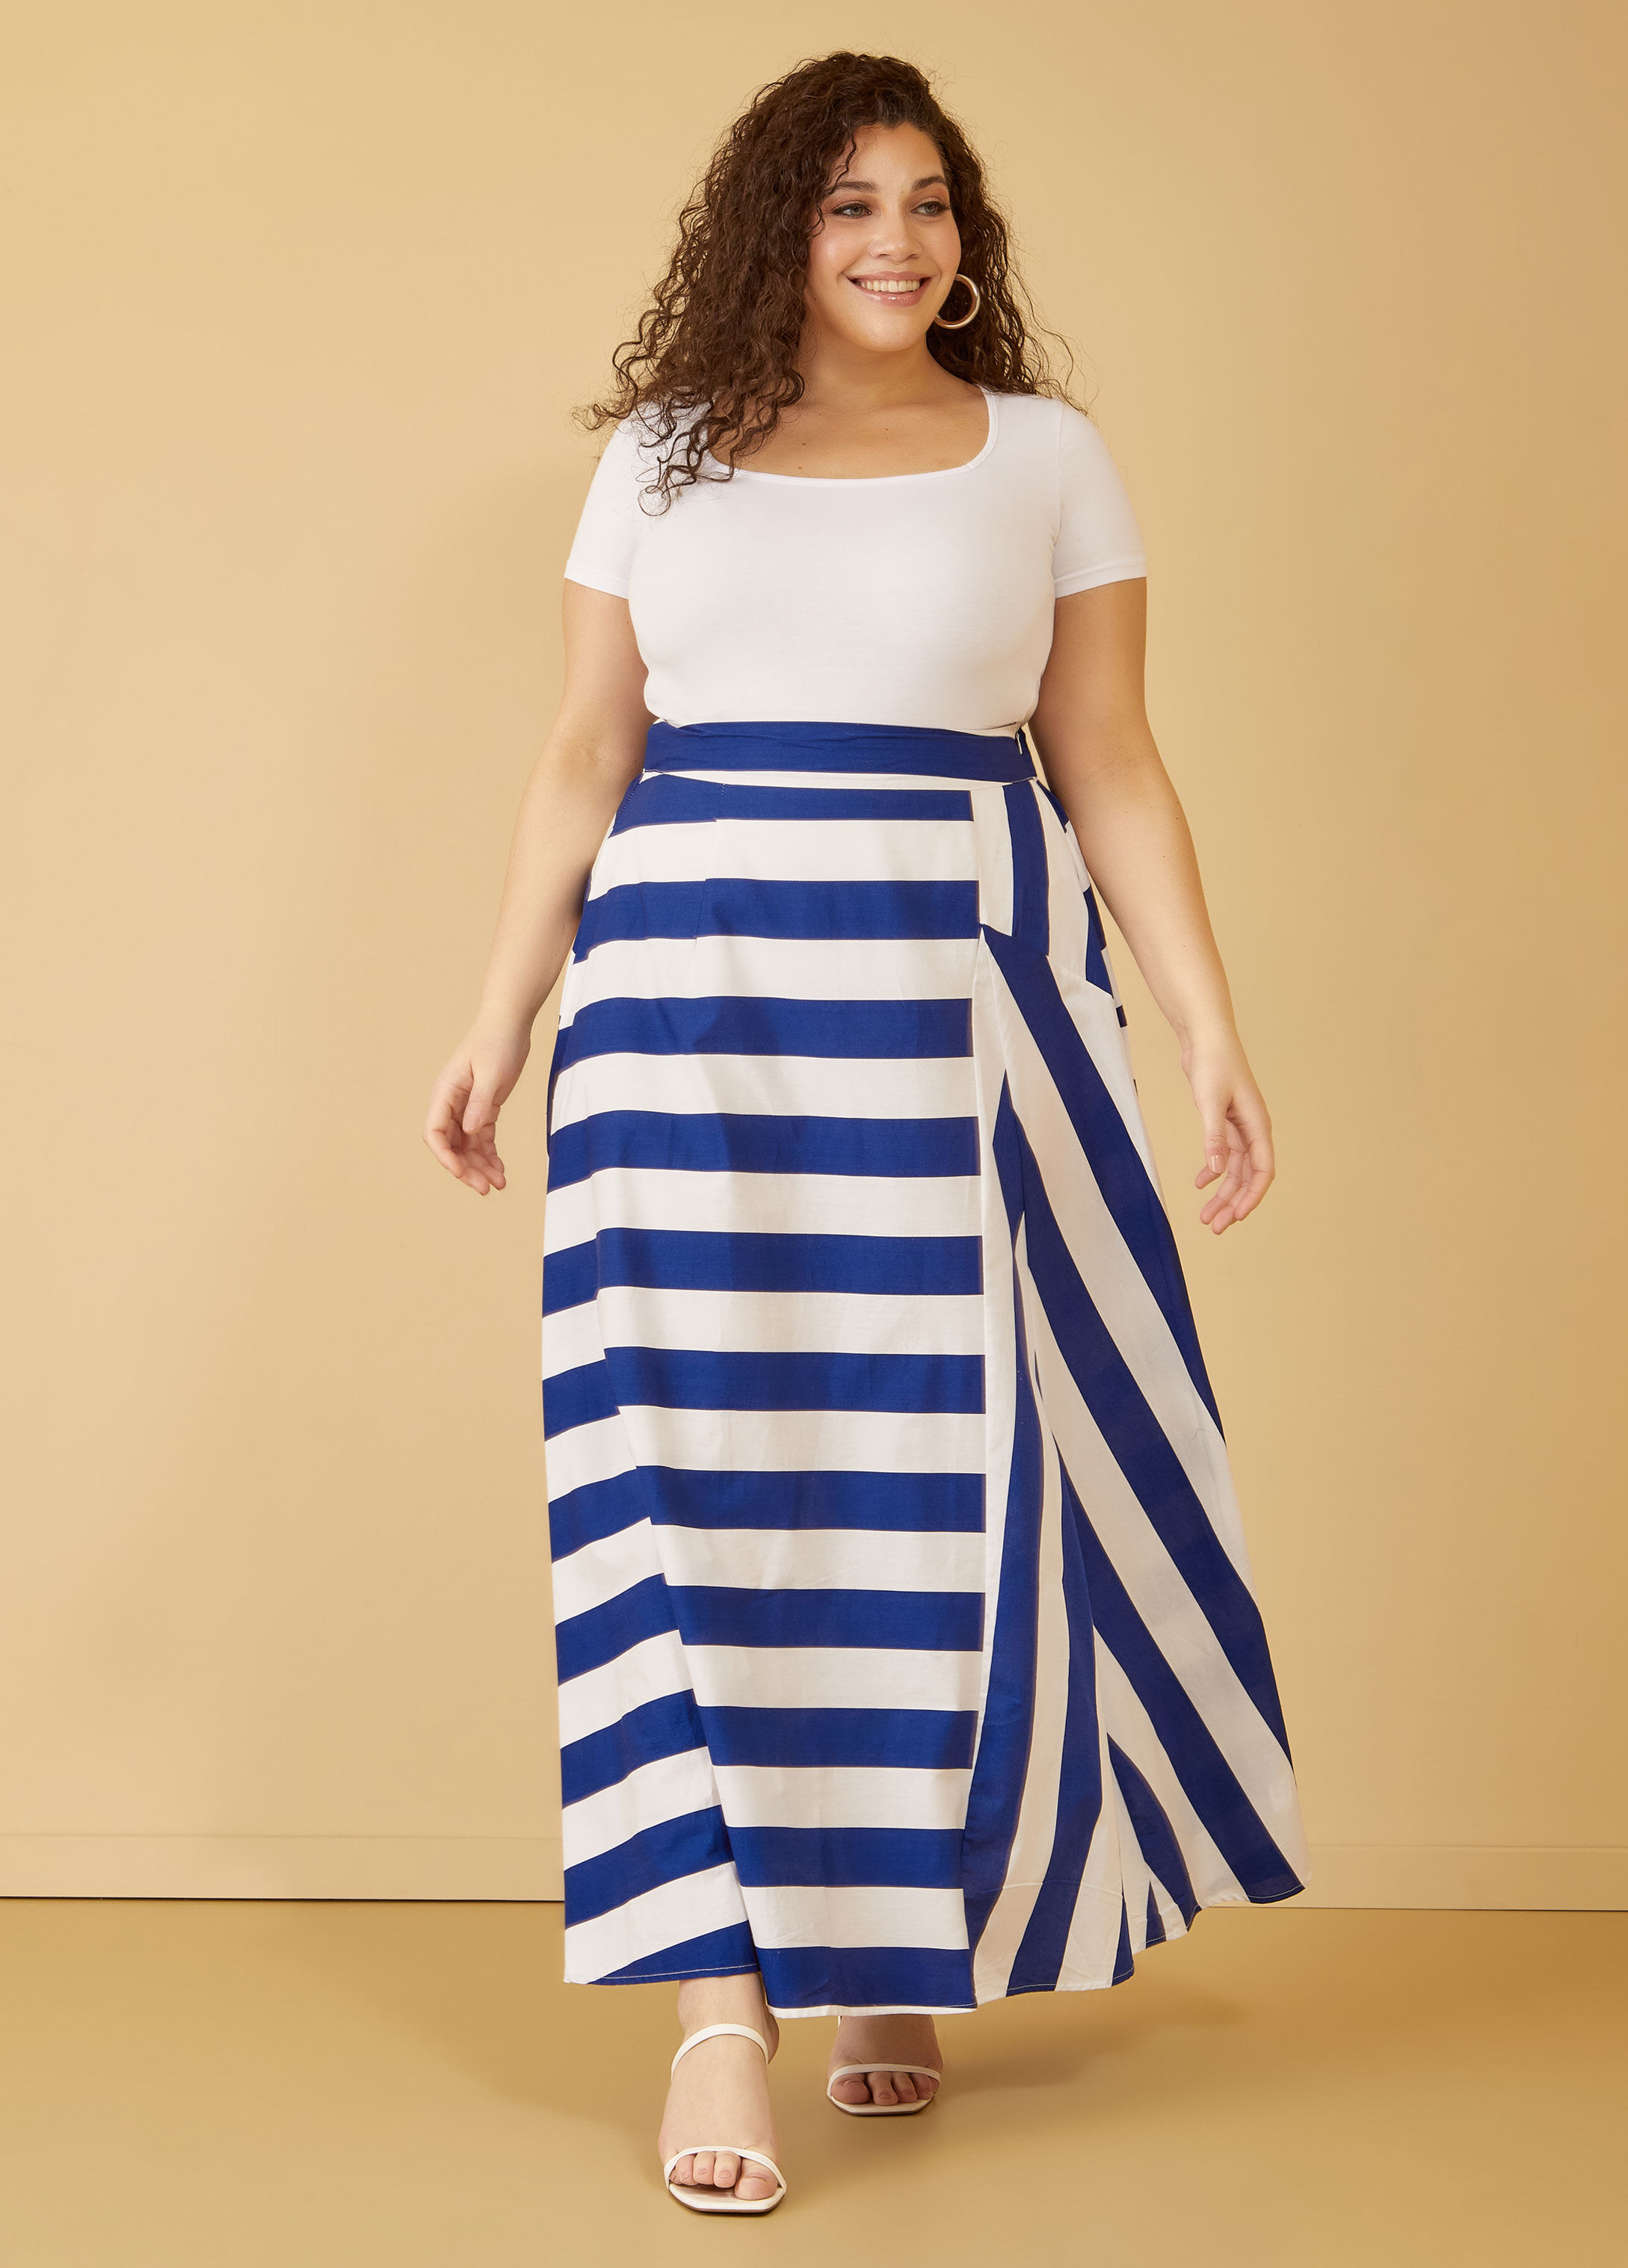 Plus Size Striped Crop Top and Skirt Set US$ 7.97 - www.lover-pretty.com